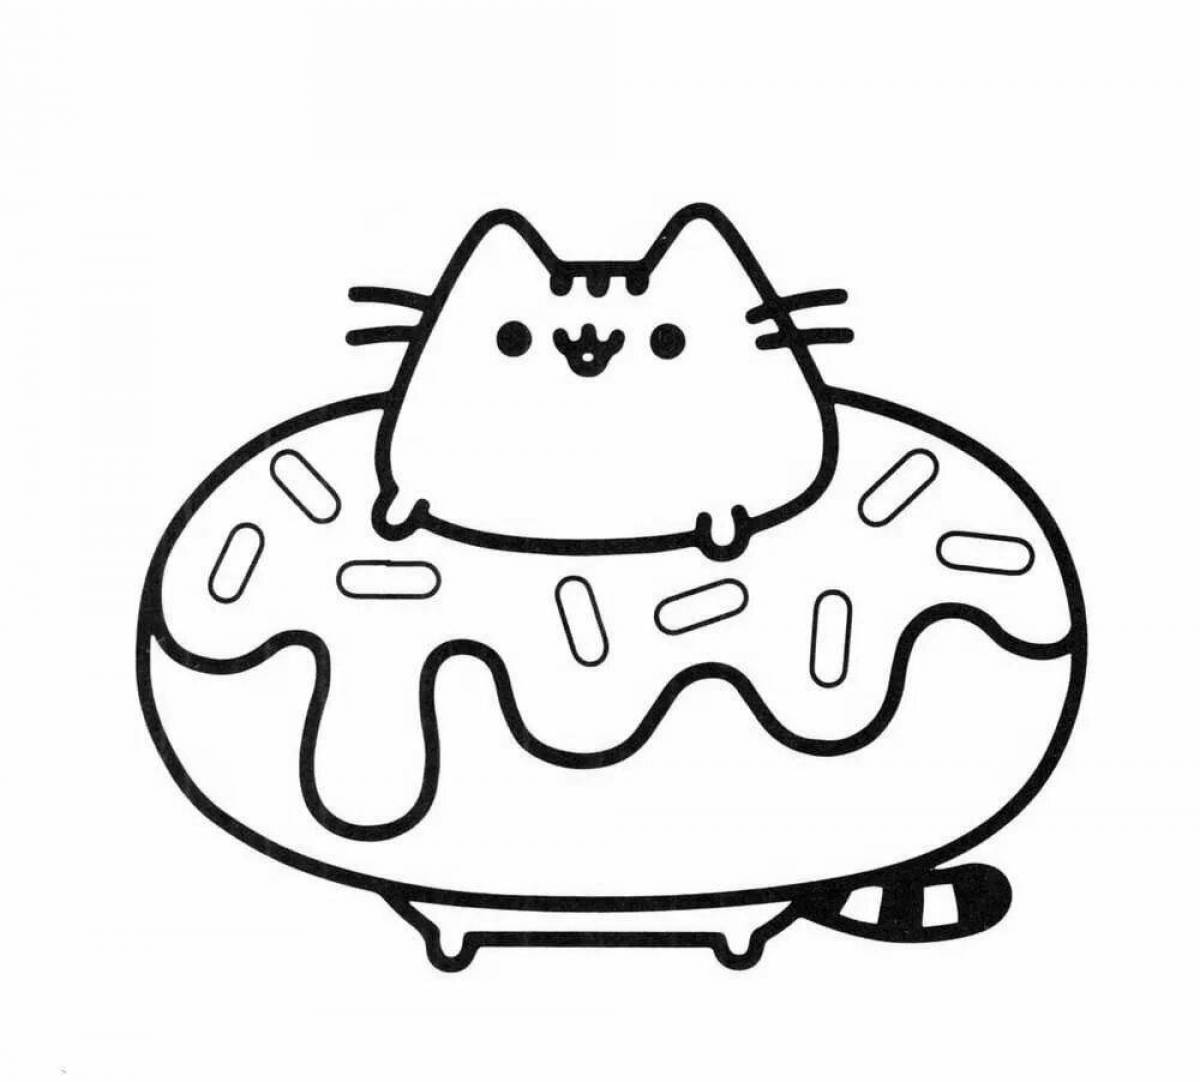 Colorful donut cat coloring page